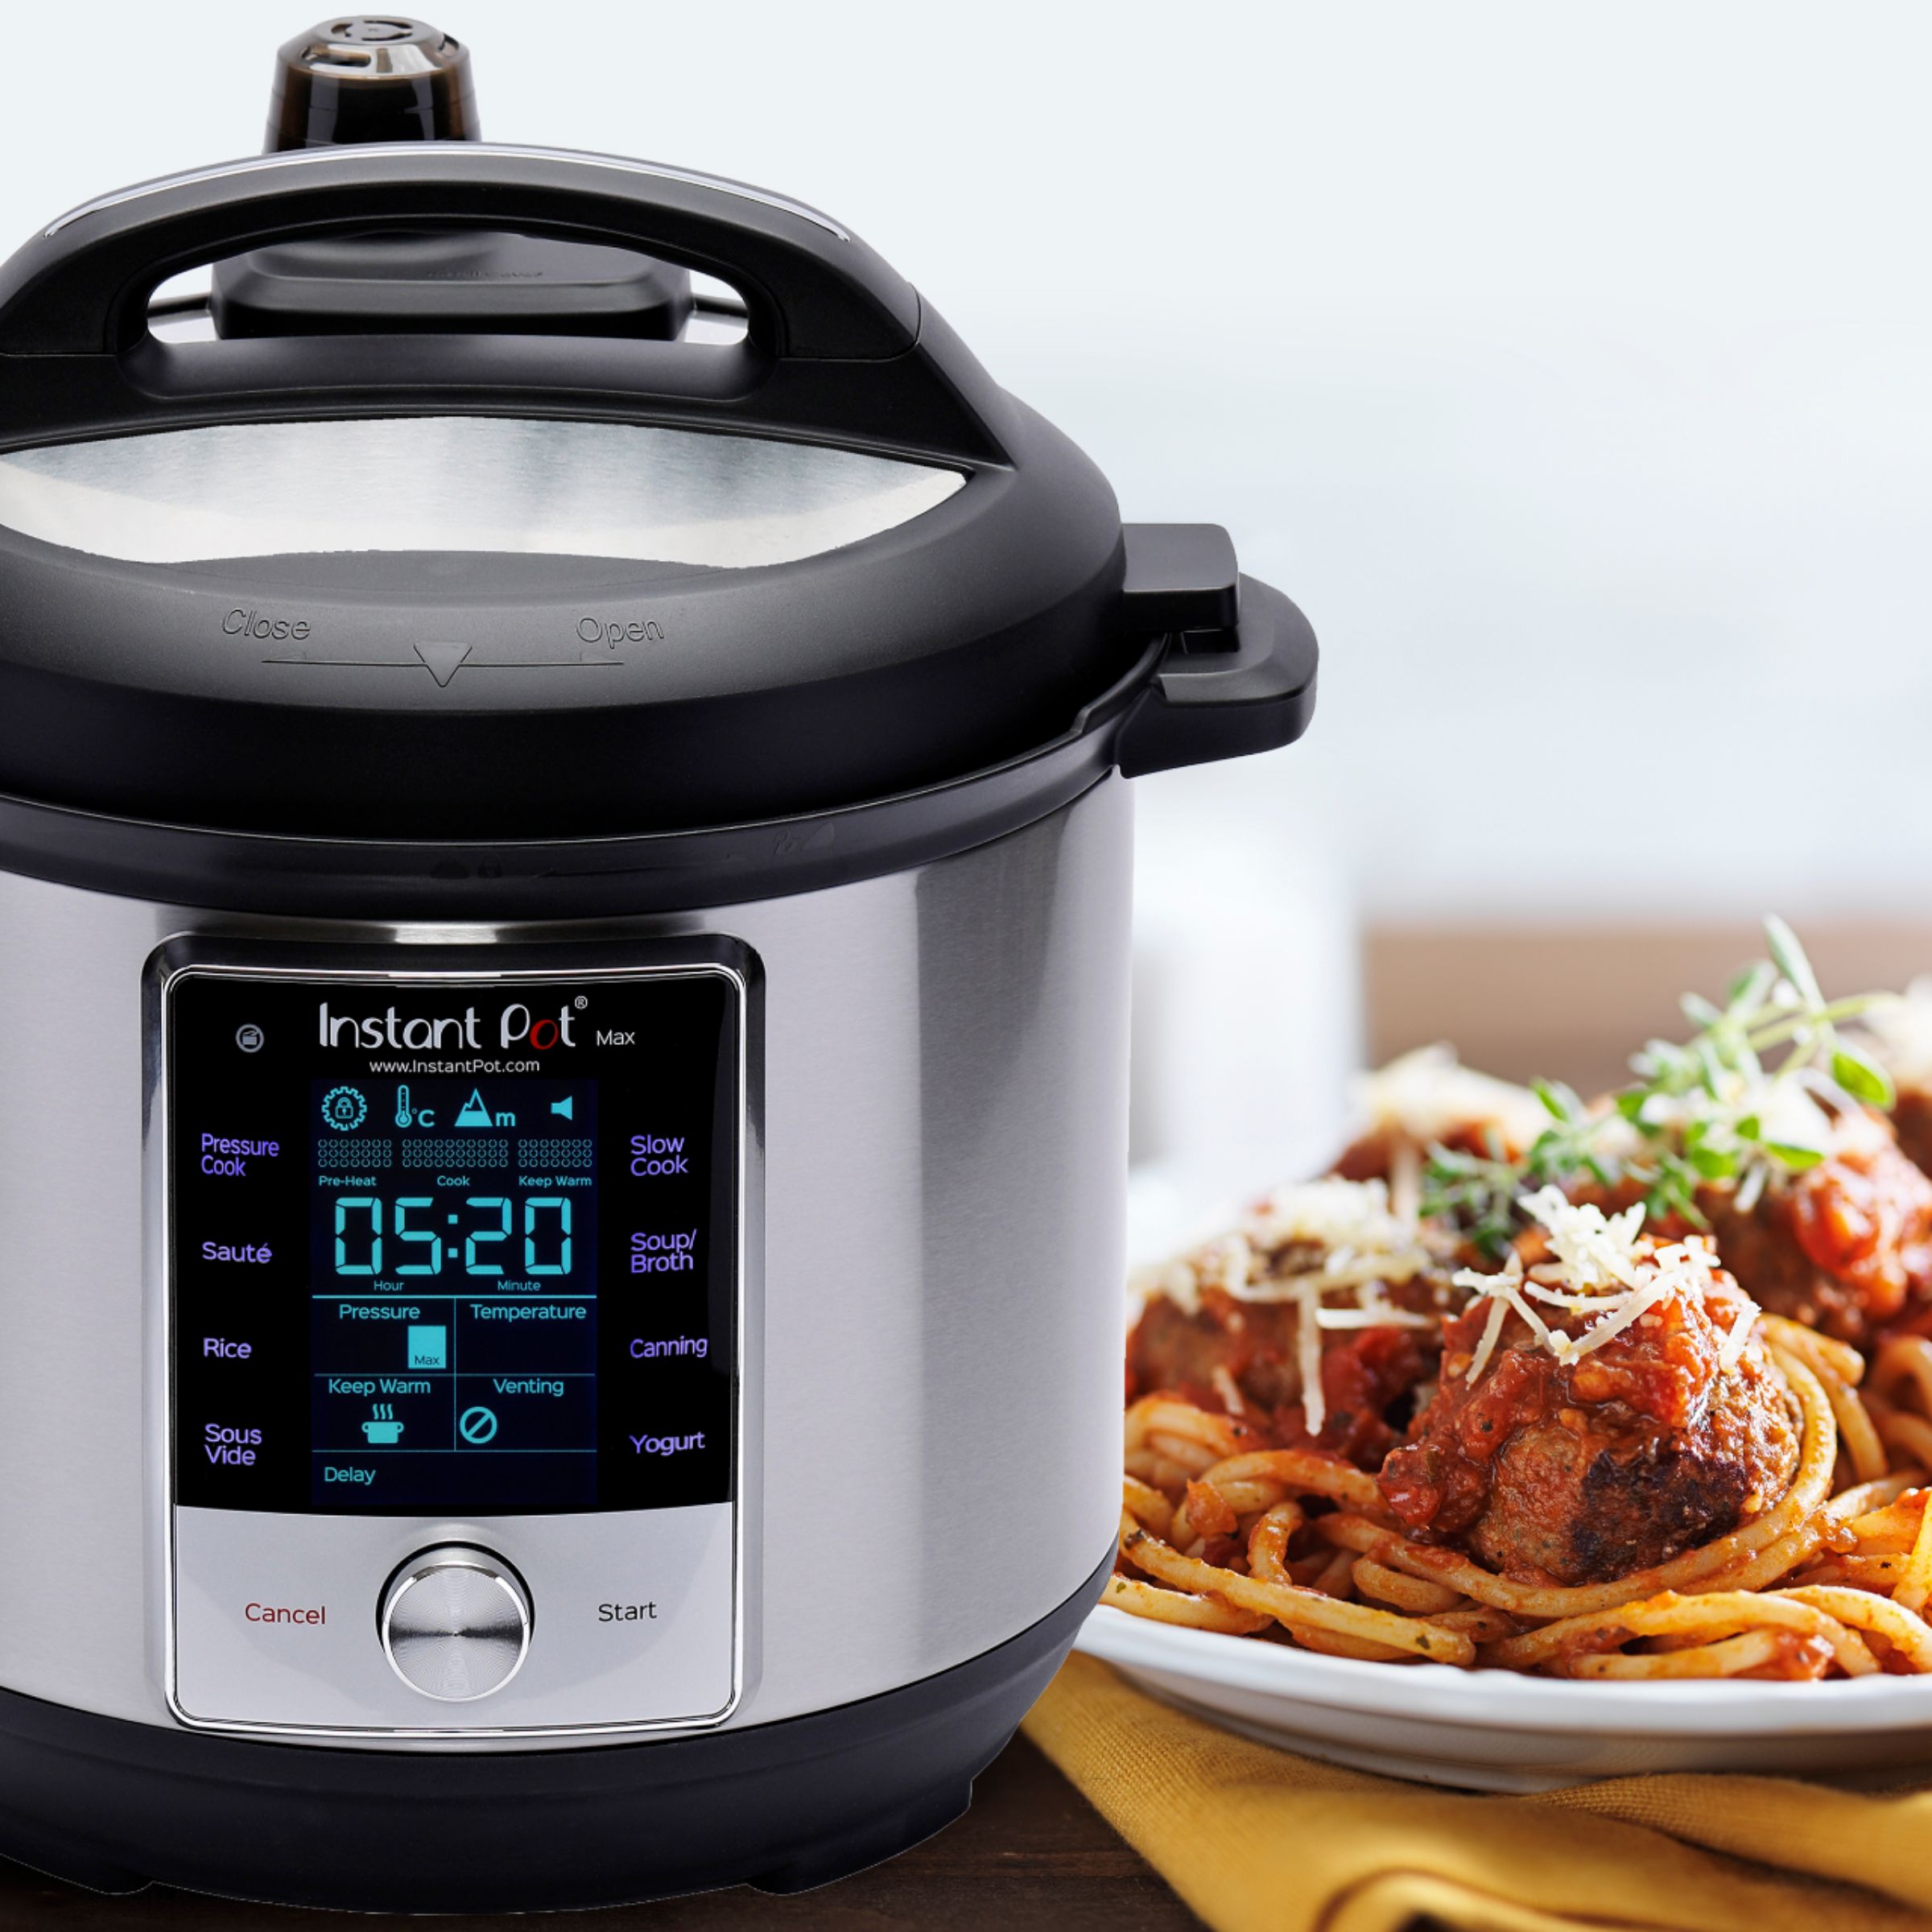 Instant Pot Duo Evo Plus 6 qt 10 in 1 Pressure Cooker - BASE COOKER ONLY -  READ